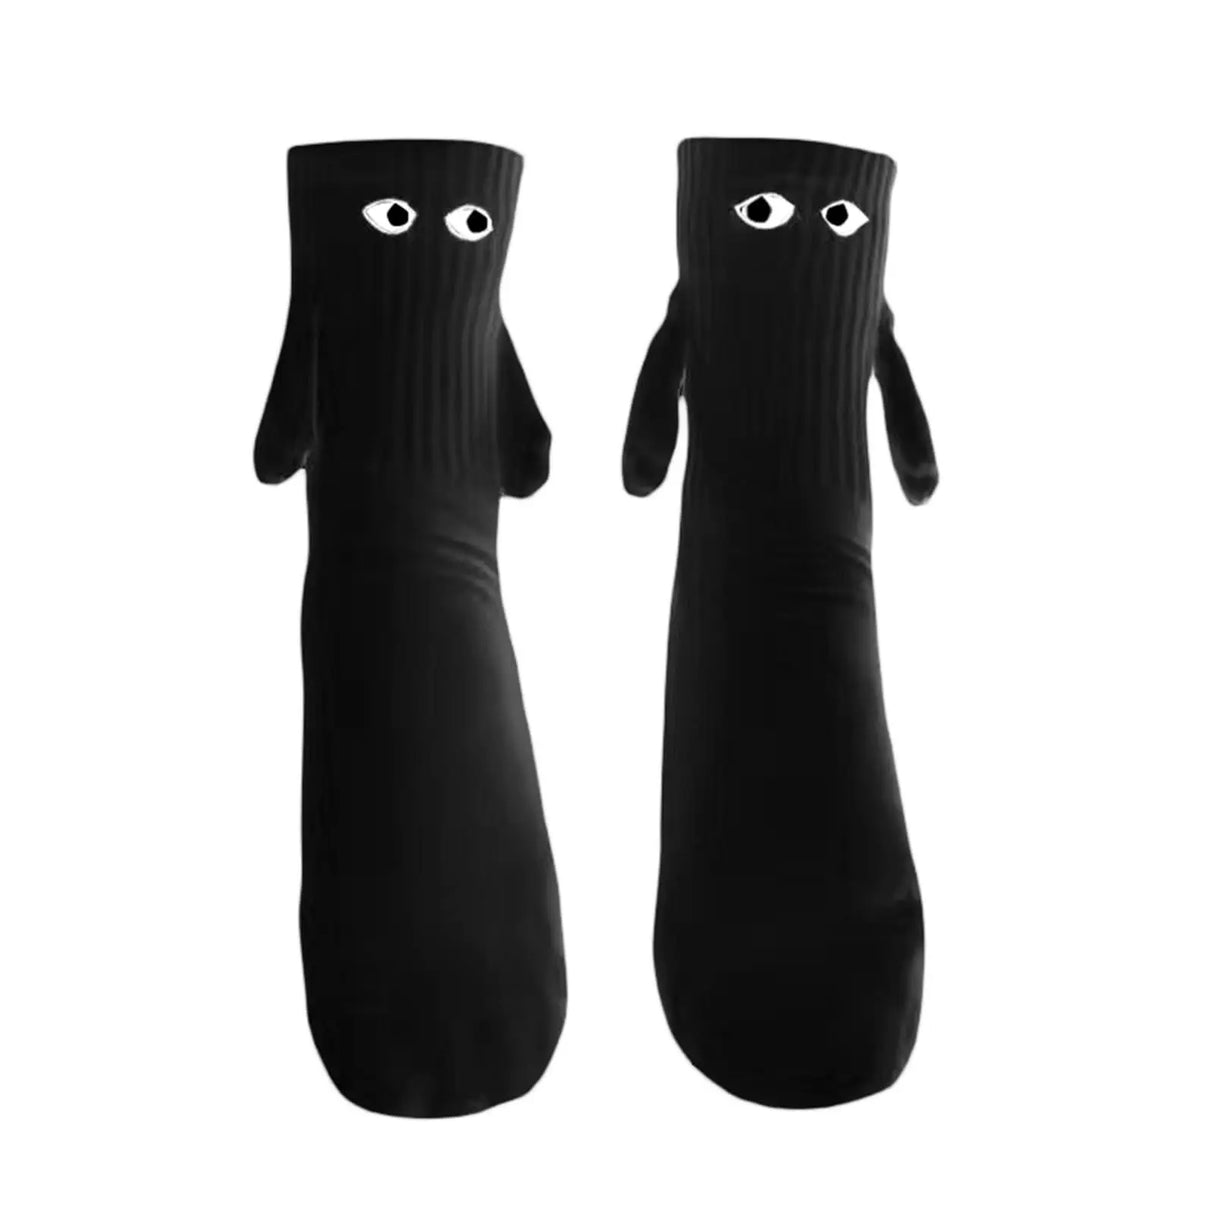 1 pair magnetic socks with hands and eyes